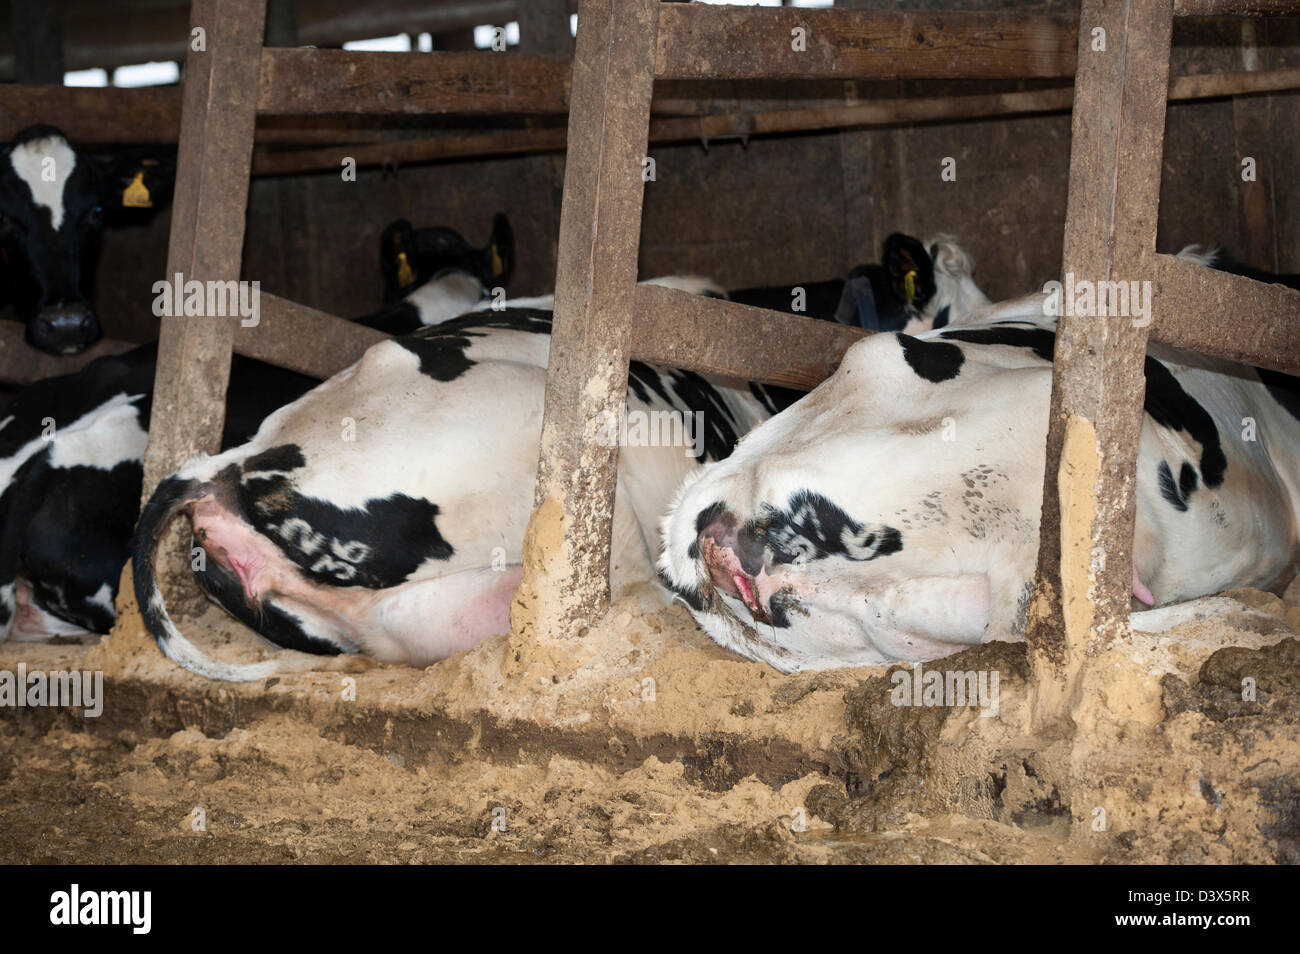 Dairy cattle housed in a cubicle shed. North Yorkshire, UK. Stock Photo